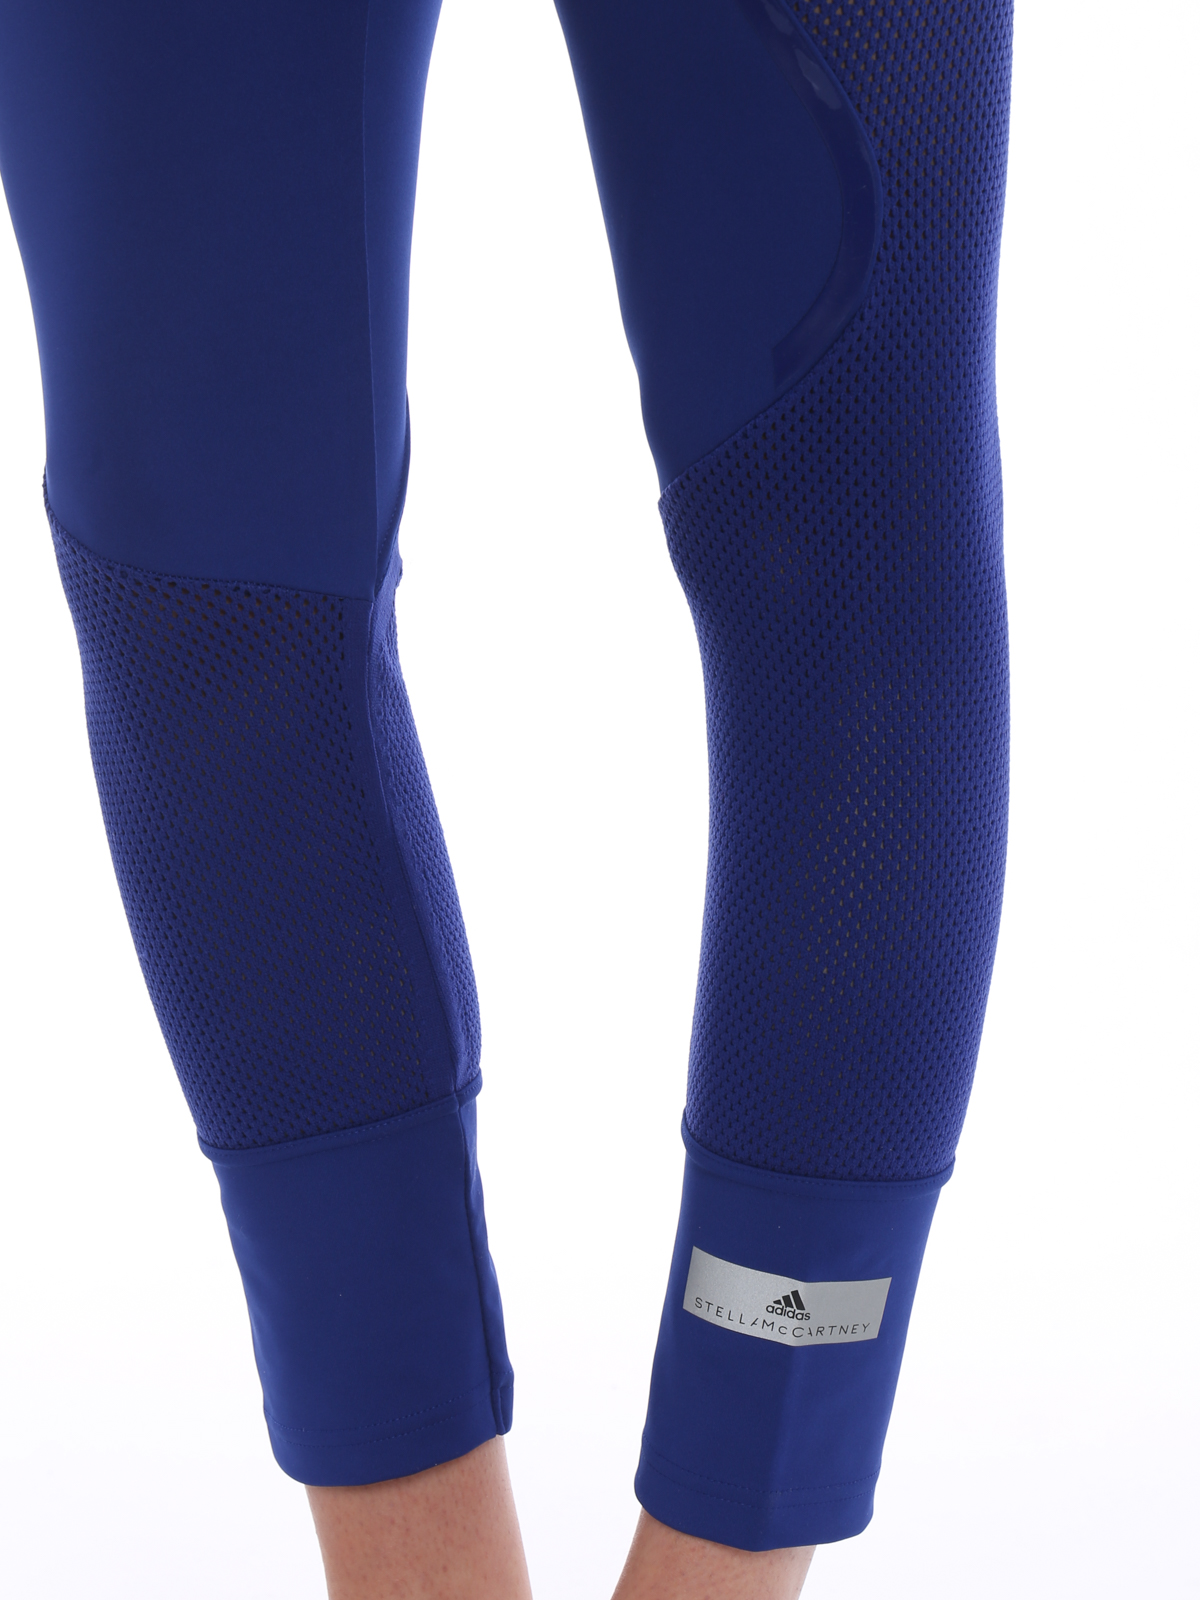 https://images.thebestshops.com/product_images/original/adidas-by-stella-mccartney-buy-online-run-ultra-tight-sporty-leggings-00000127404f00s015.jpg